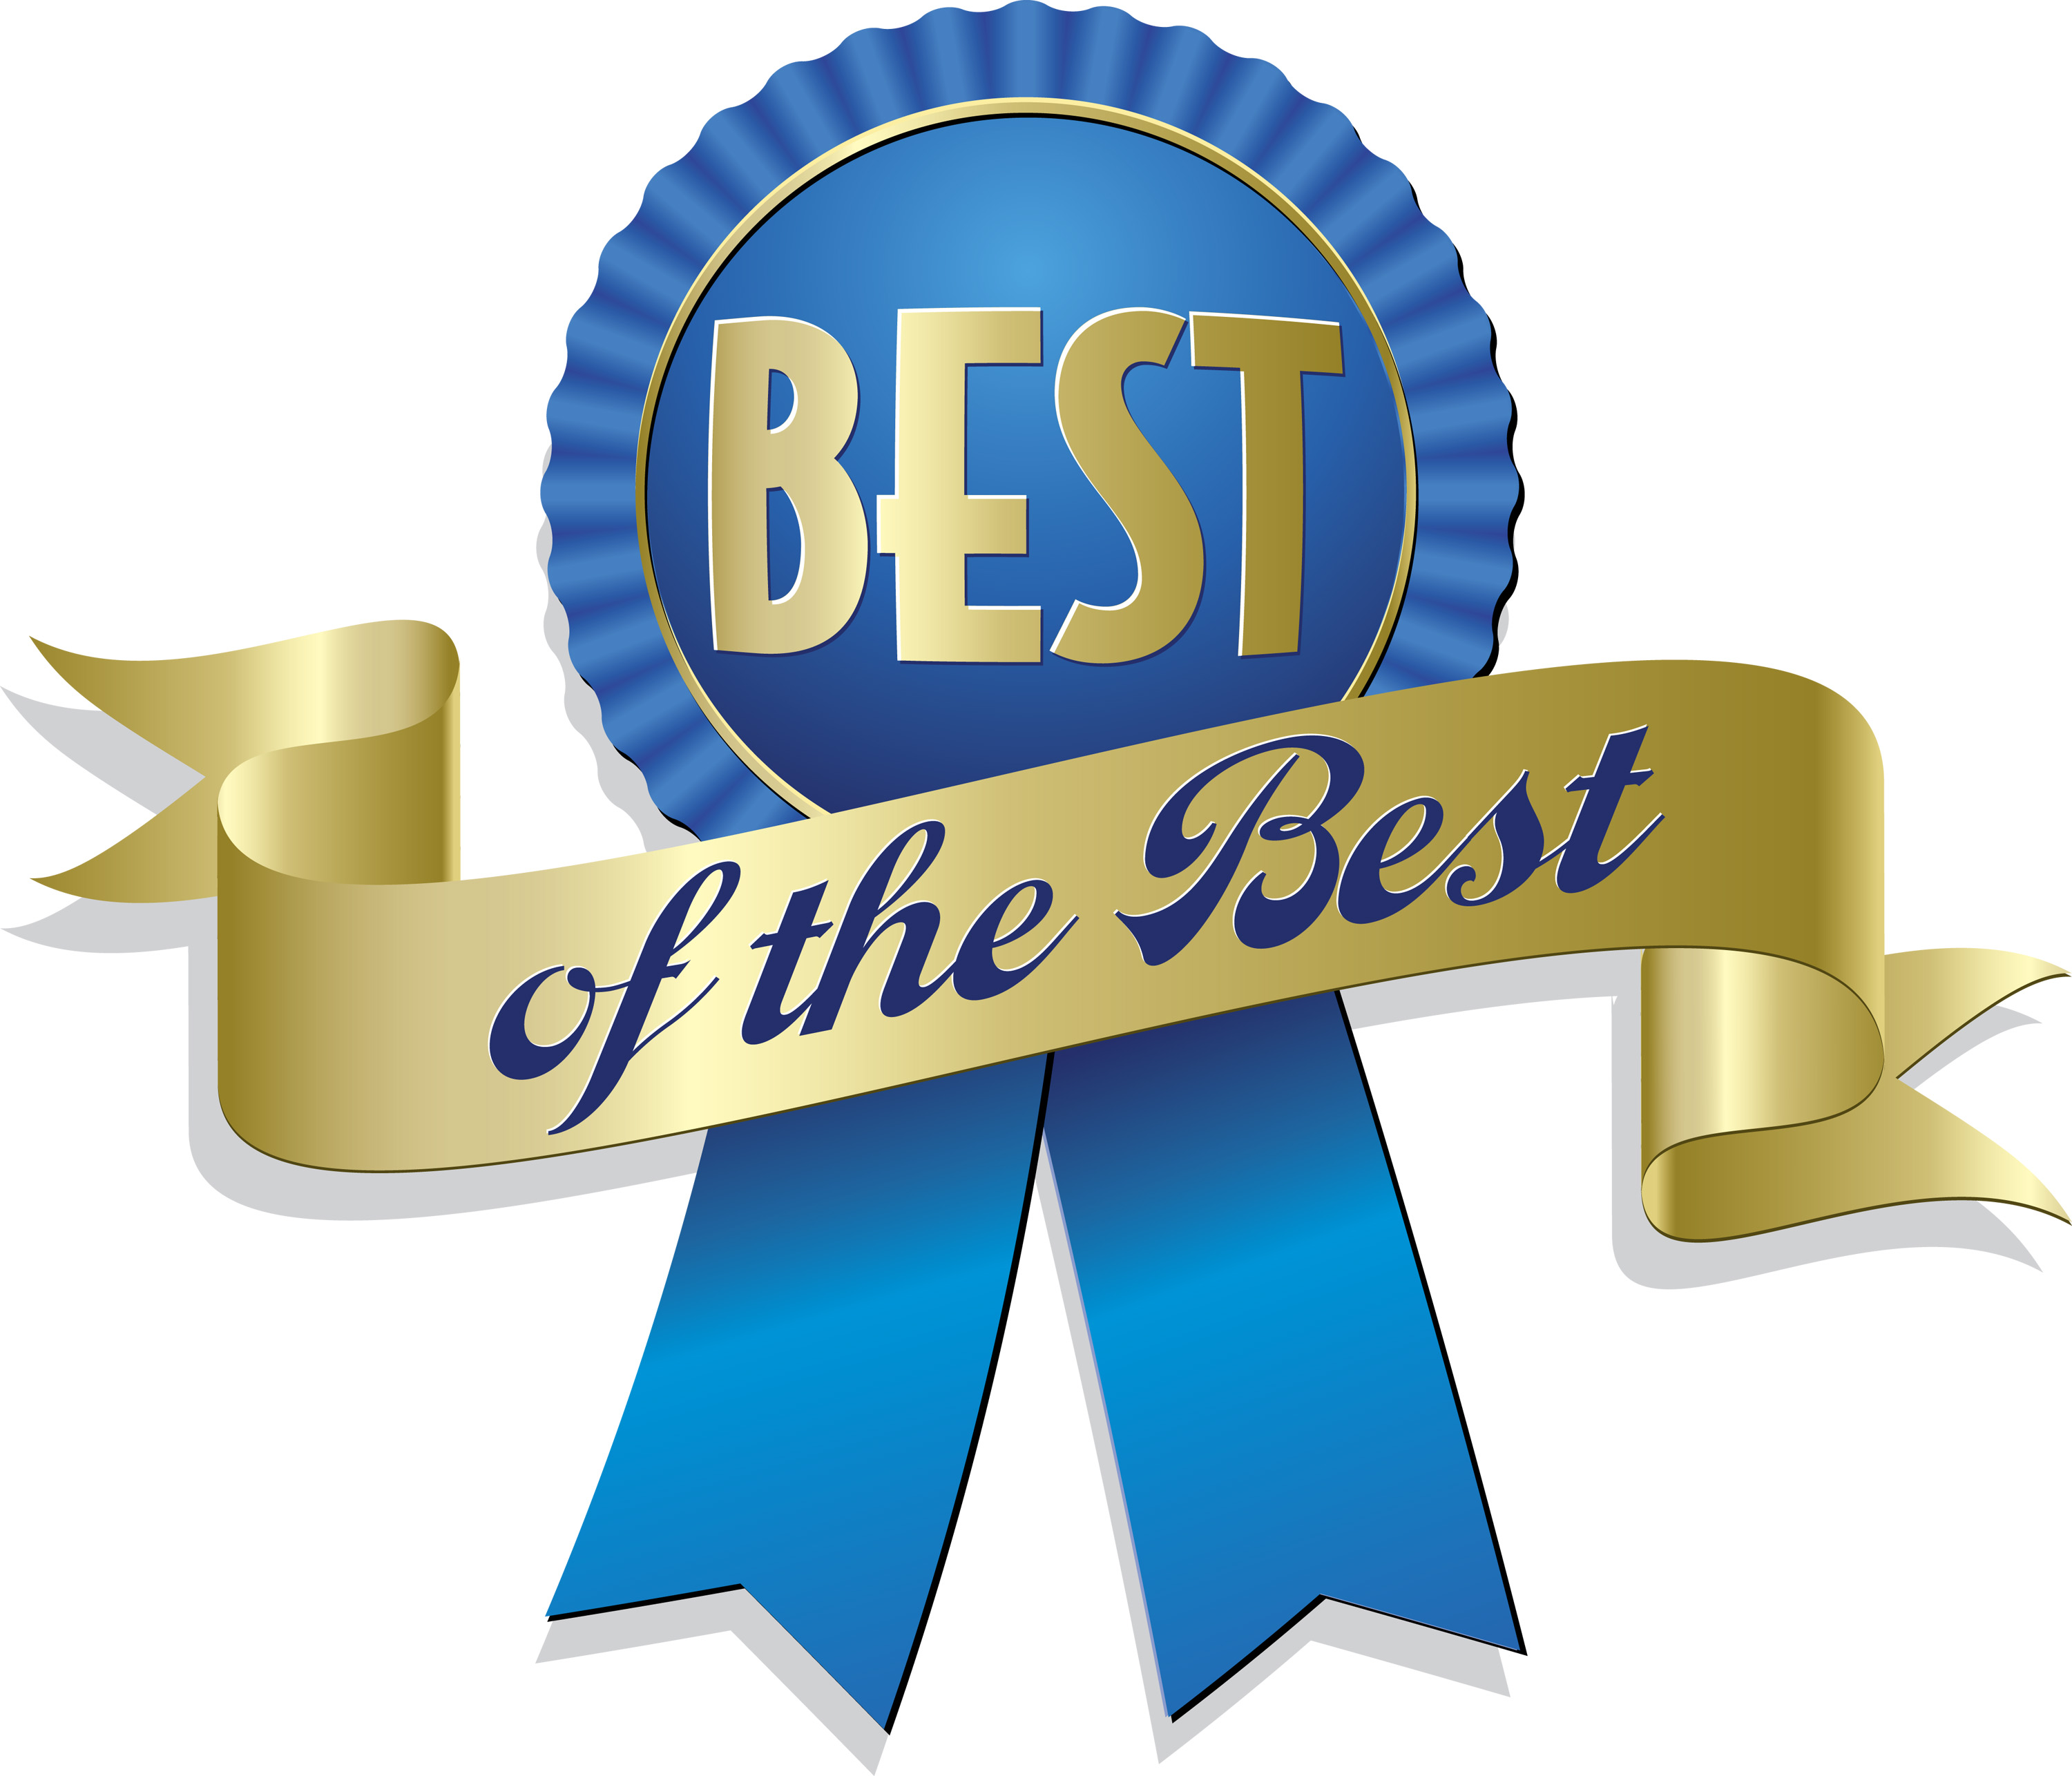 Take the best shop. The best картинки. Значок "the best". The best надпись. Надпись best of the best.